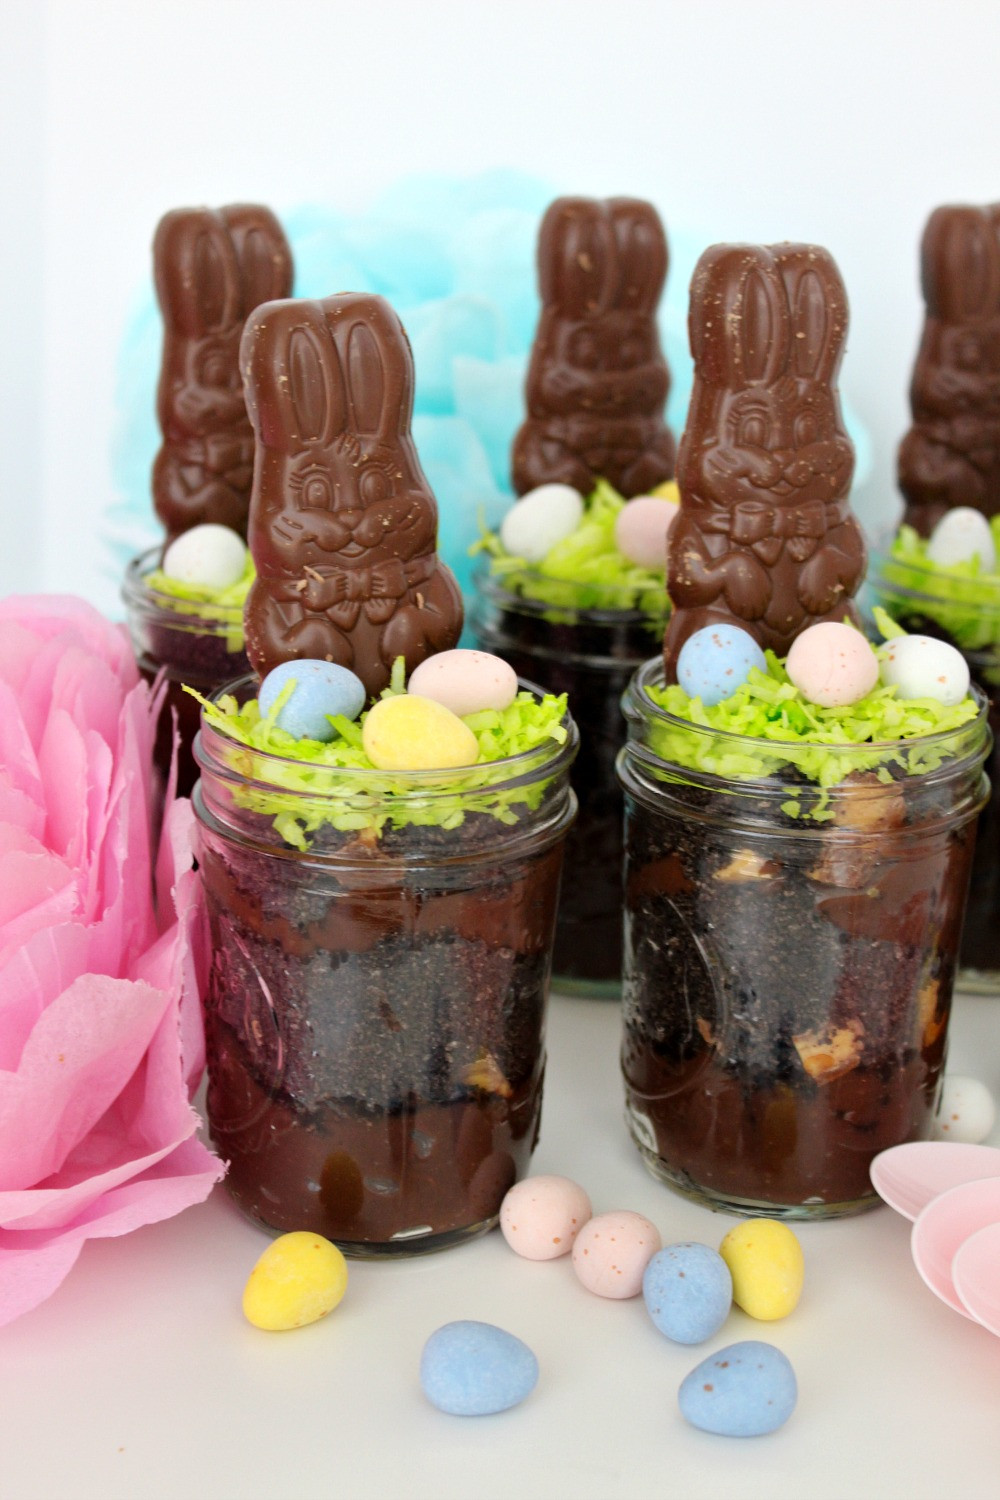 Desserts Recipes For Easter
 An Easy & Delicious Easter Dessert Using Classic and New